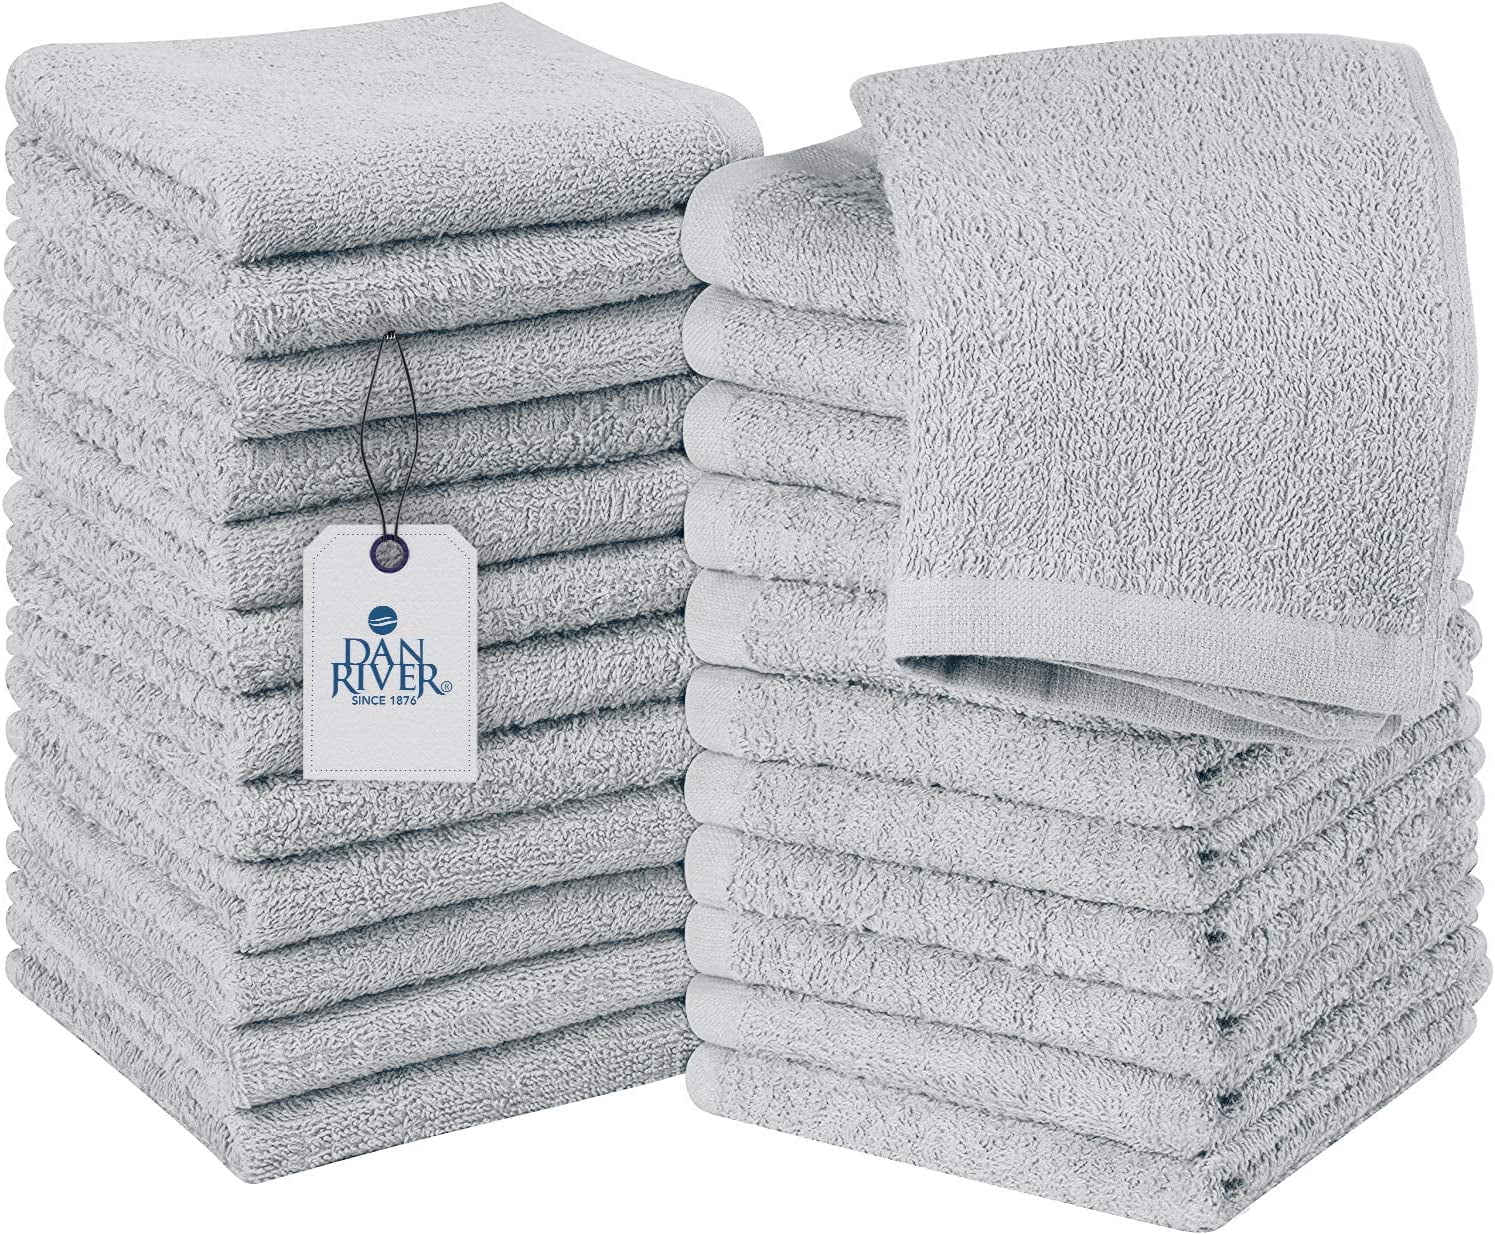 Dan River 100% Cotton Washcloths 24 Pack High-Quality Face and Body Cloth | Towels for Bathroom, Hand, Kitchen, Cleaning | 12x12 In | 400 GSM (Highrise)